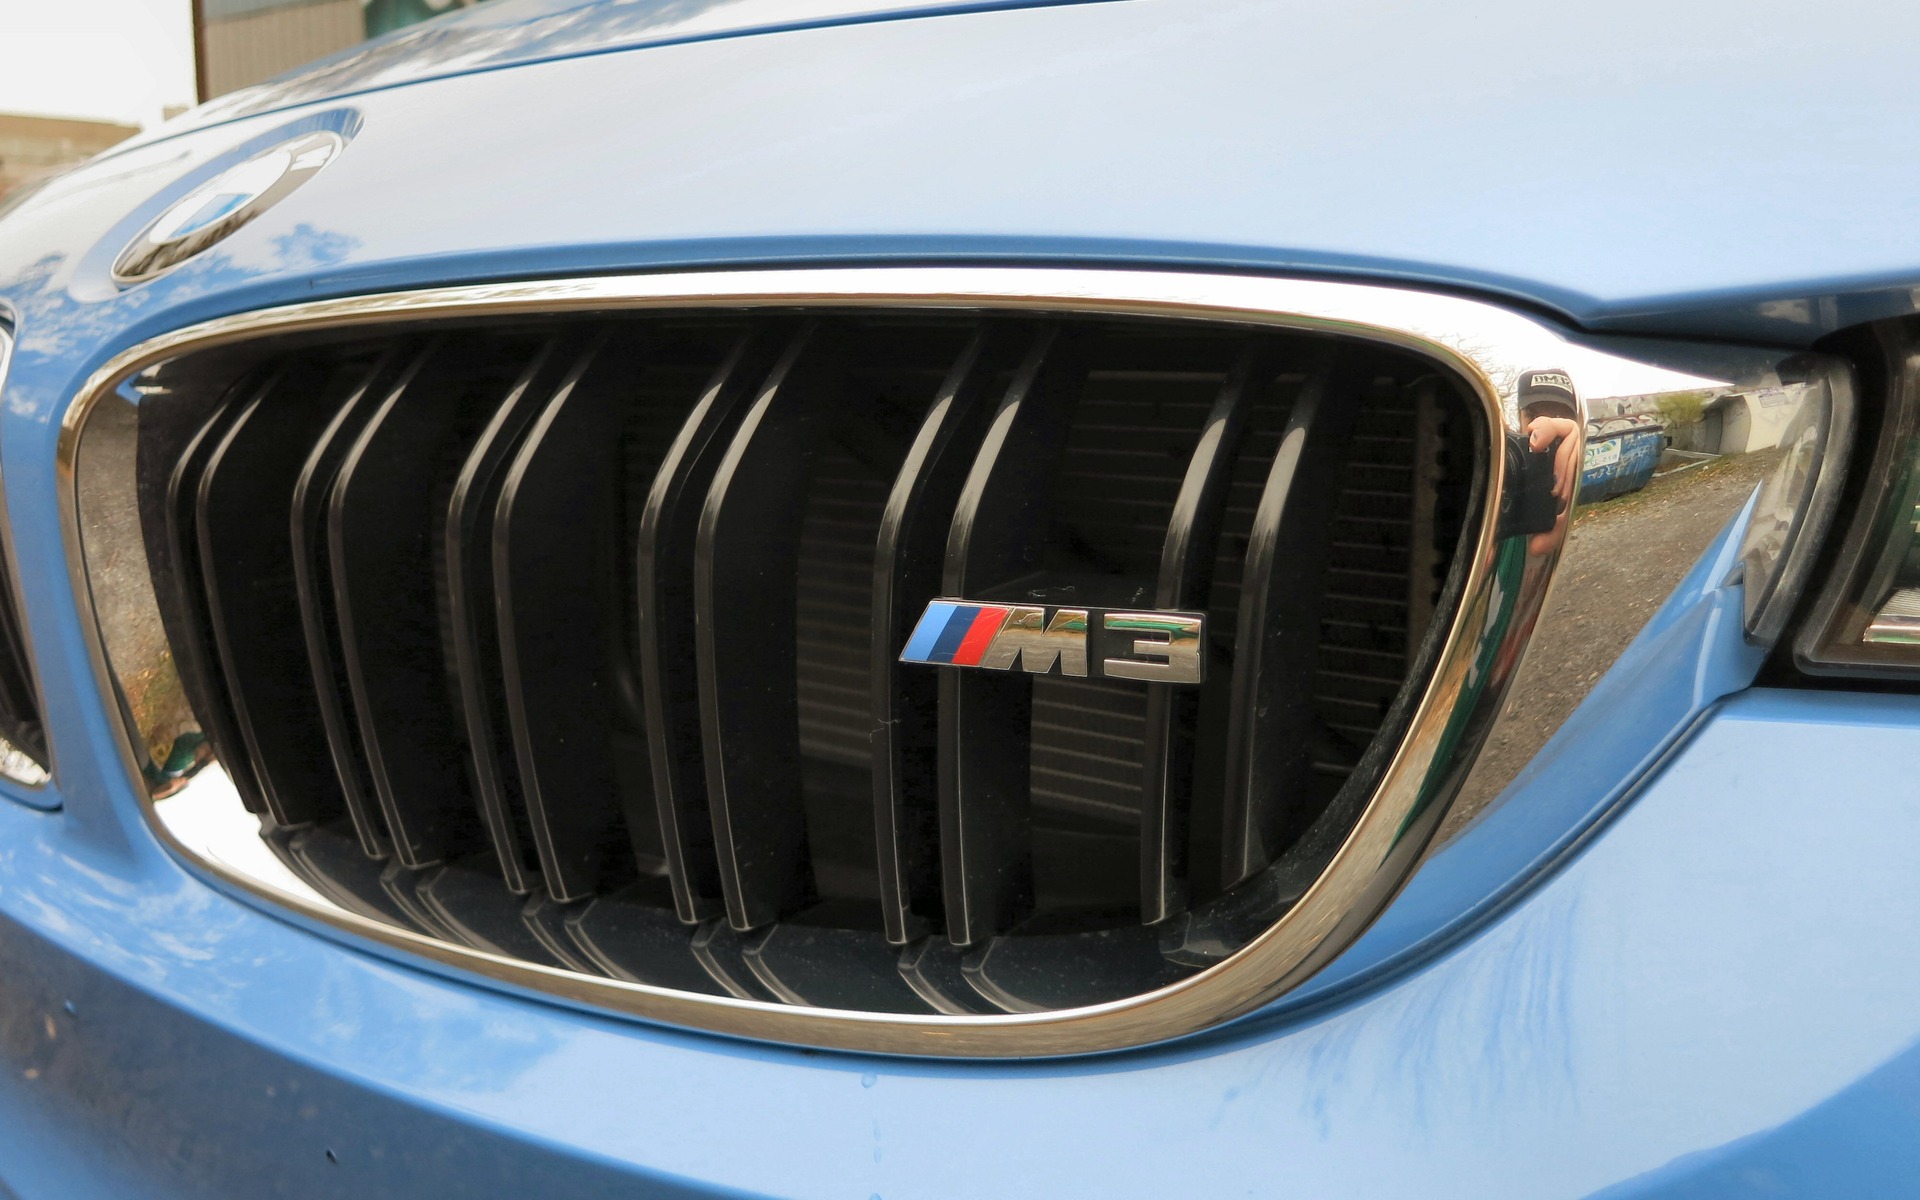 The 2015 BMW M3 breaks with tradition in a number of ways.